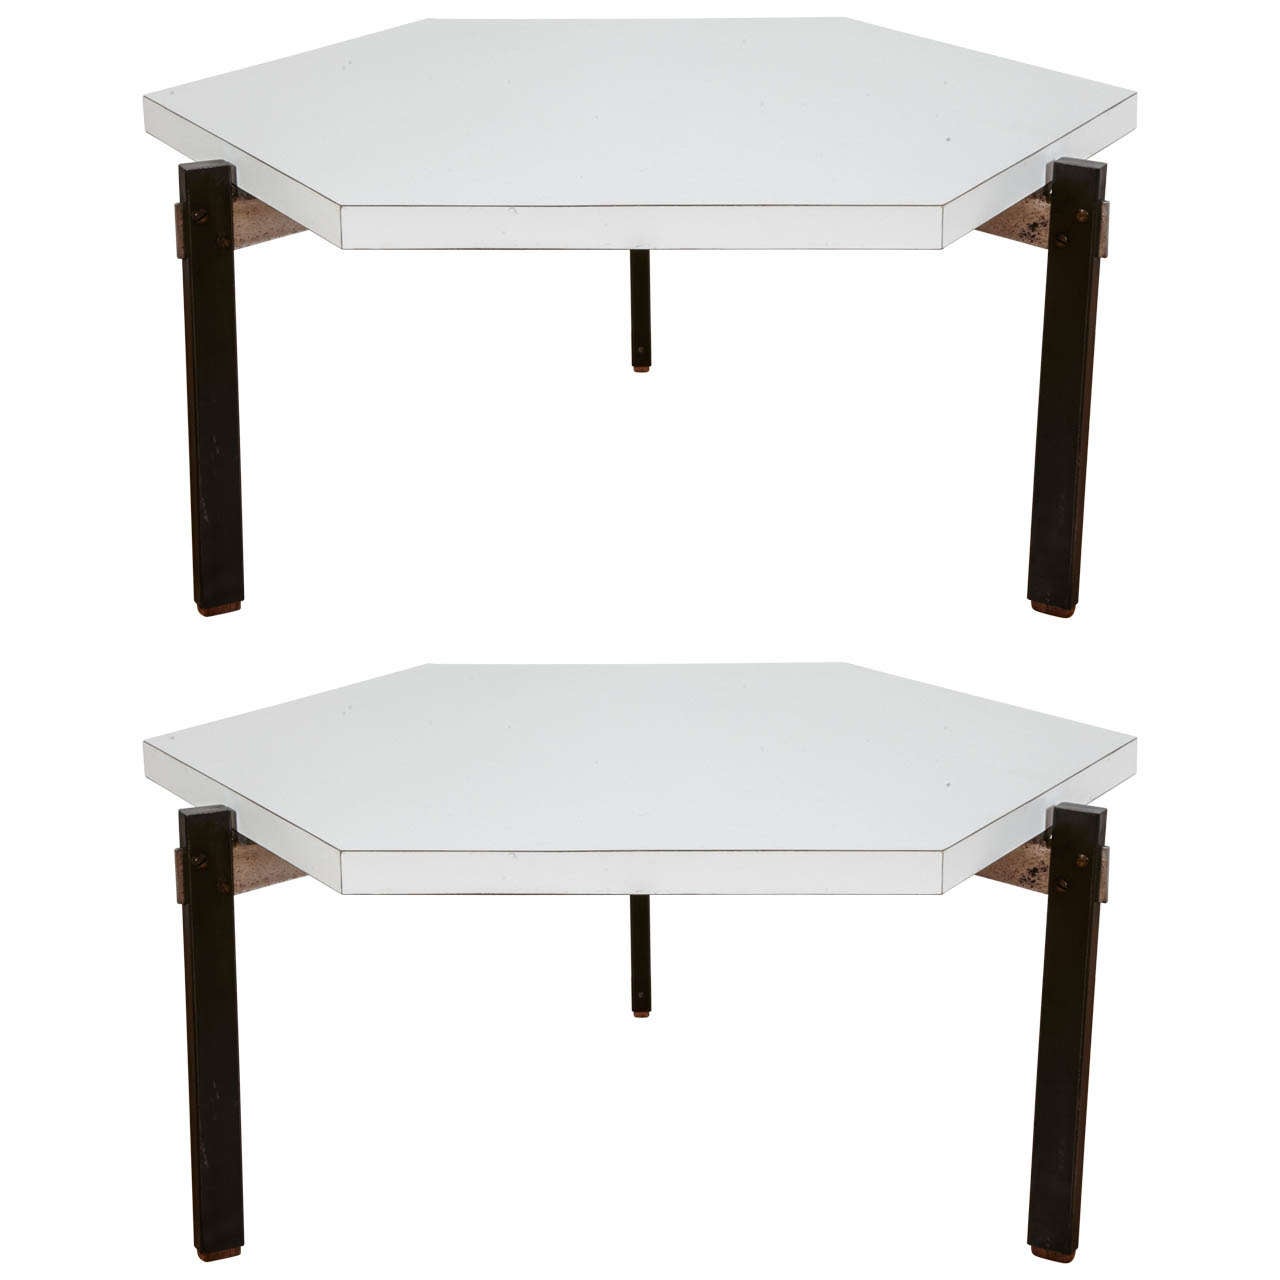 Pair of hexagonal Low Tables by André Simard - Projets 251 Edition - 1959 For Sale